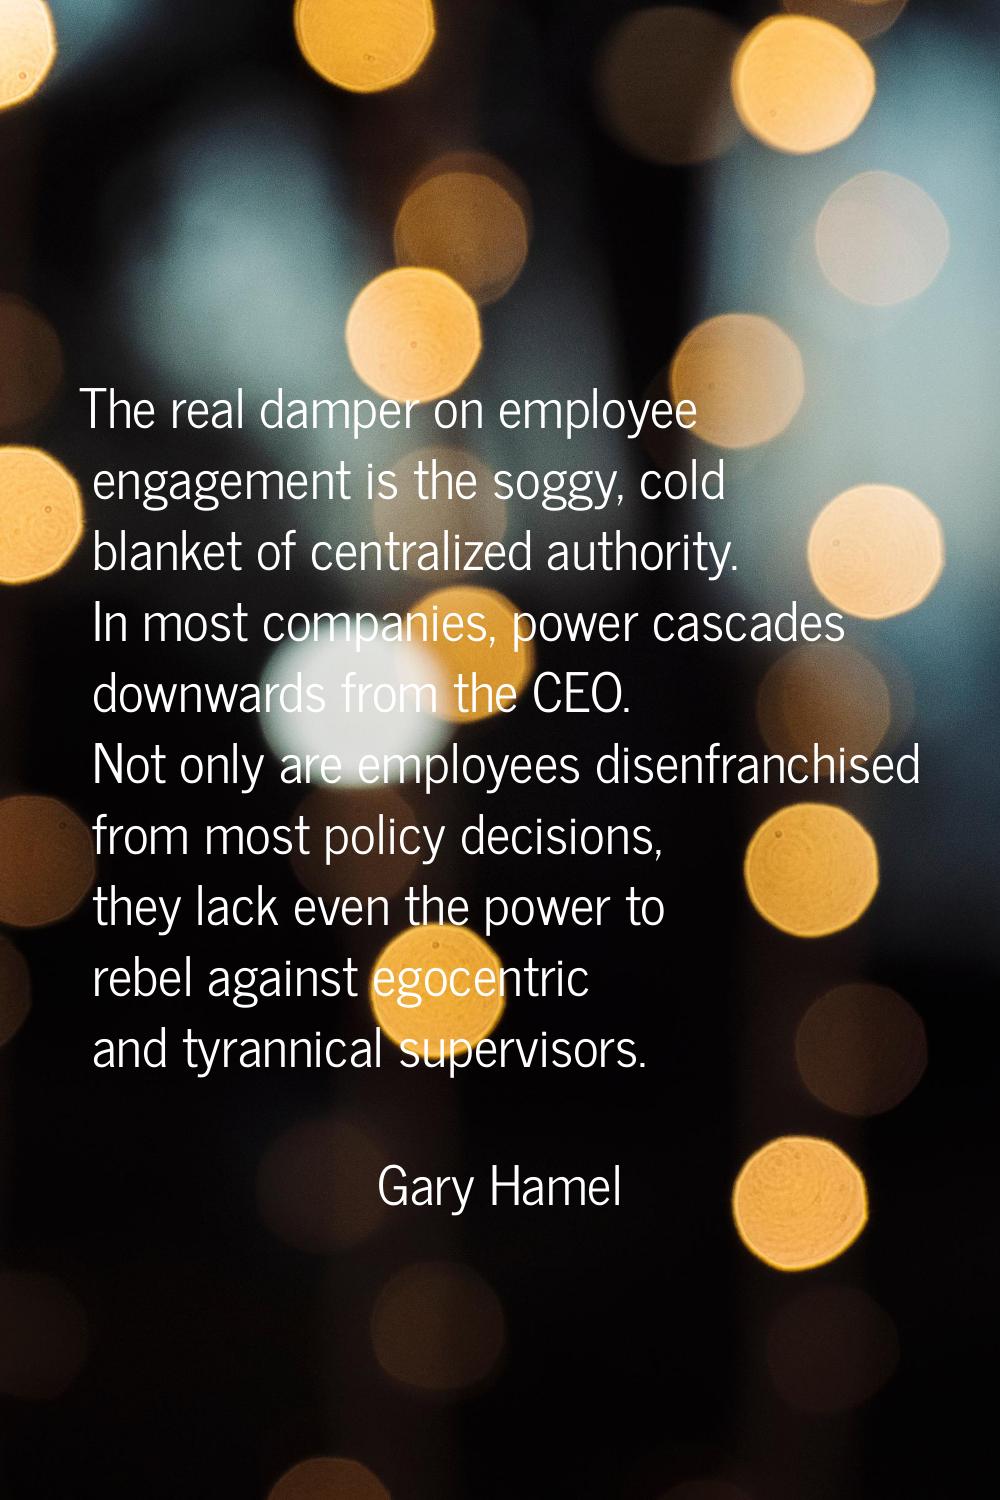 The real damper on employee engagement is the soggy, cold blanket of centralized authority. In most